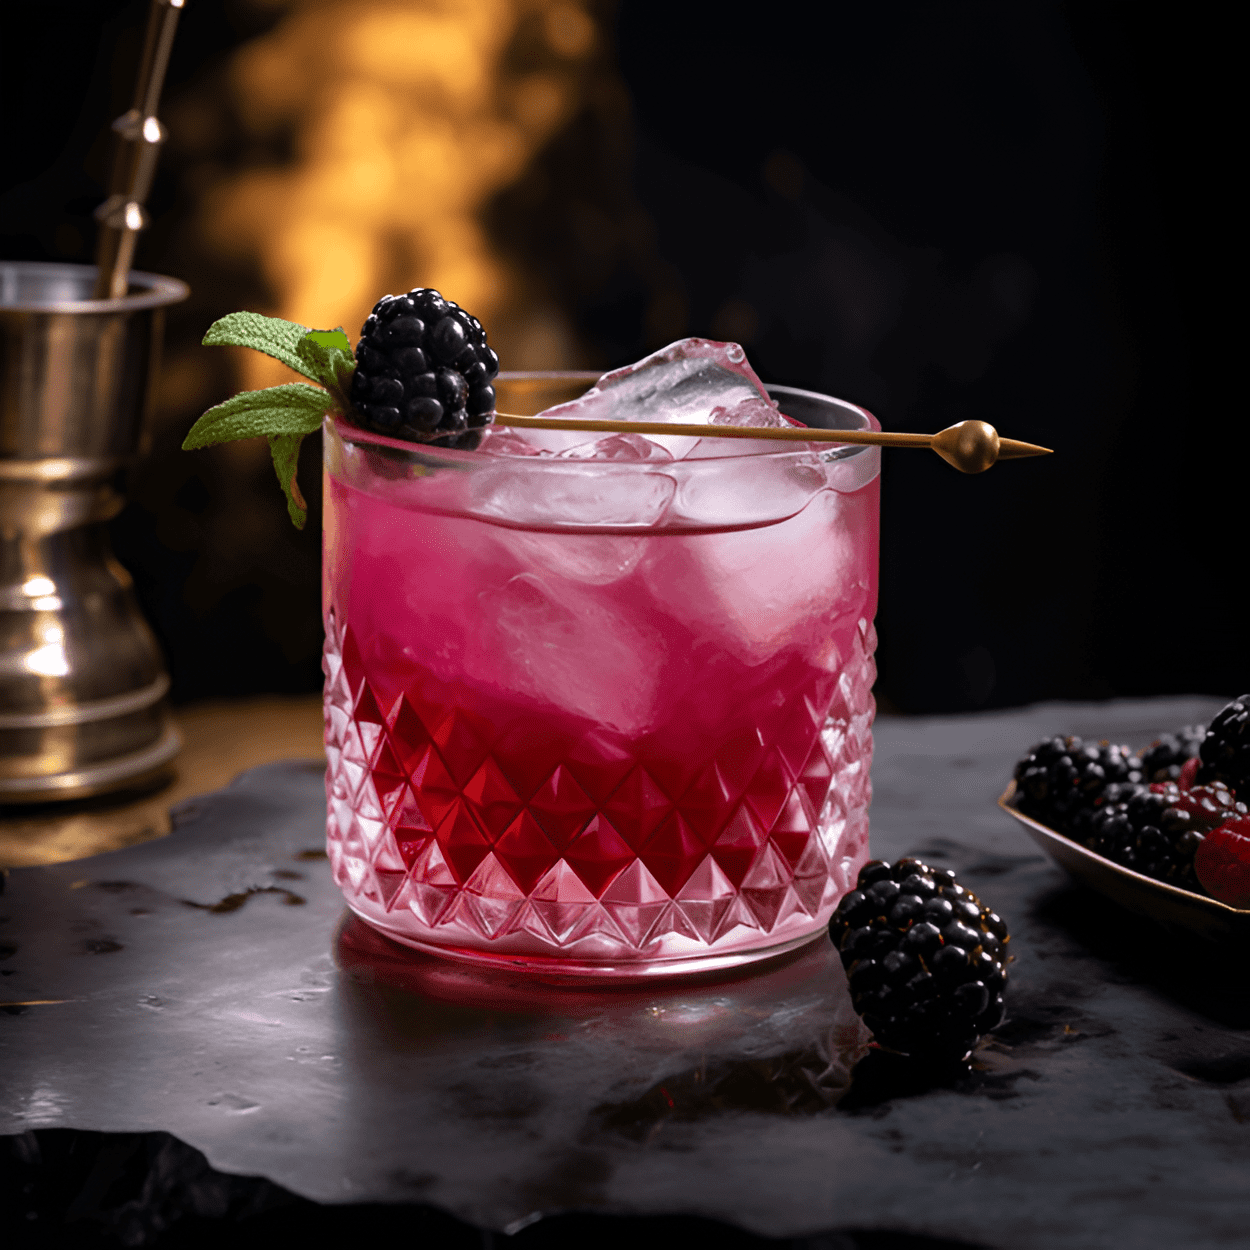 The Snakebite cocktail has a crisp, refreshing taste with a perfect balance of sweet and tart flavors. The combination of lager and cider gives it a light, fruity undertone, while the blackcurrant liqueur adds a touch of sweetness and a vibrant color.